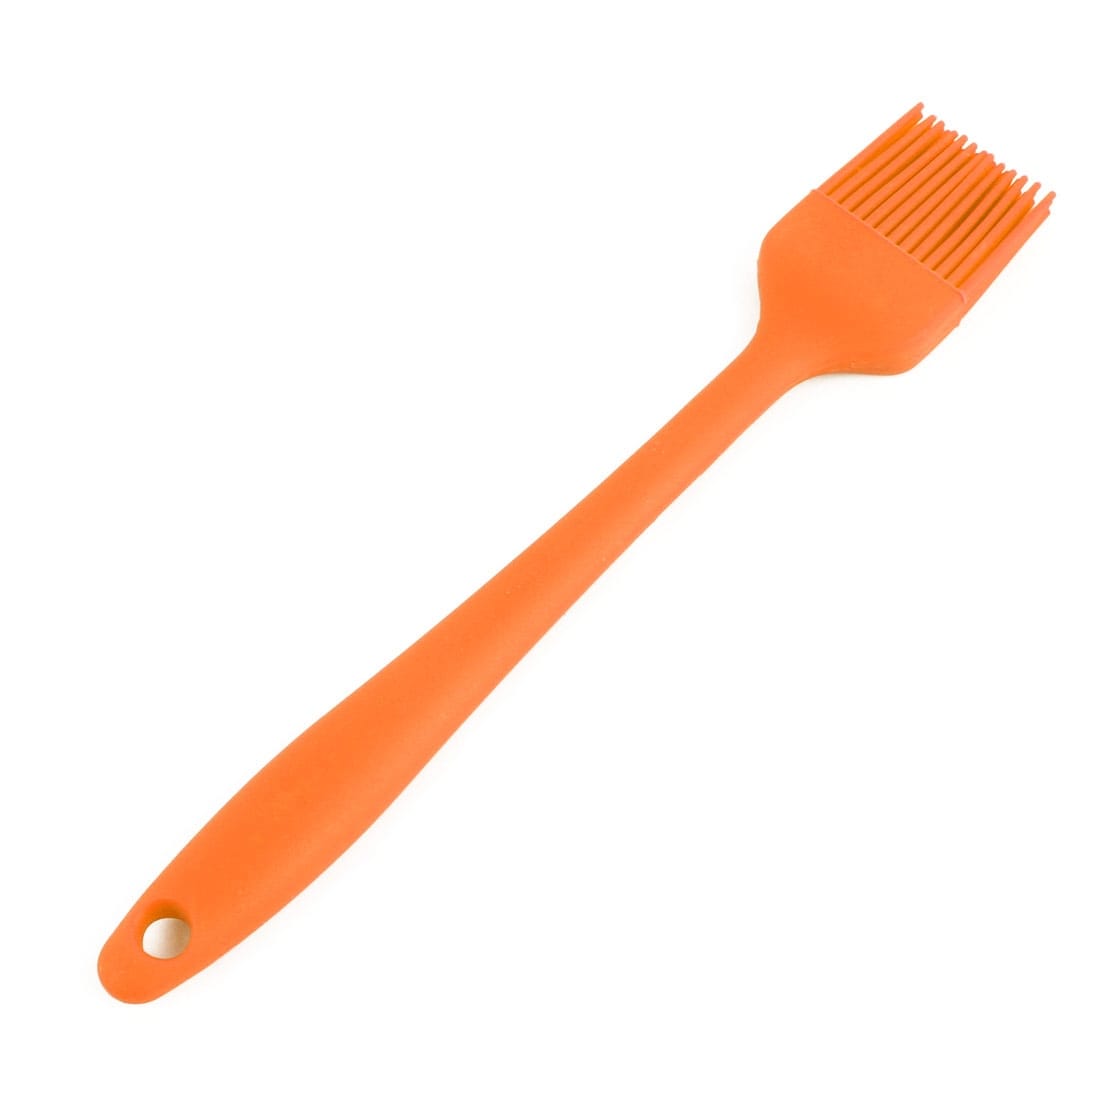 Rwm Basting Brush - Grilling BBQ Baking, Pastry and Oil Stainless Steel  Brushes with Back up Silicone Brush Heads(Orange) for Kitchen Cooking 